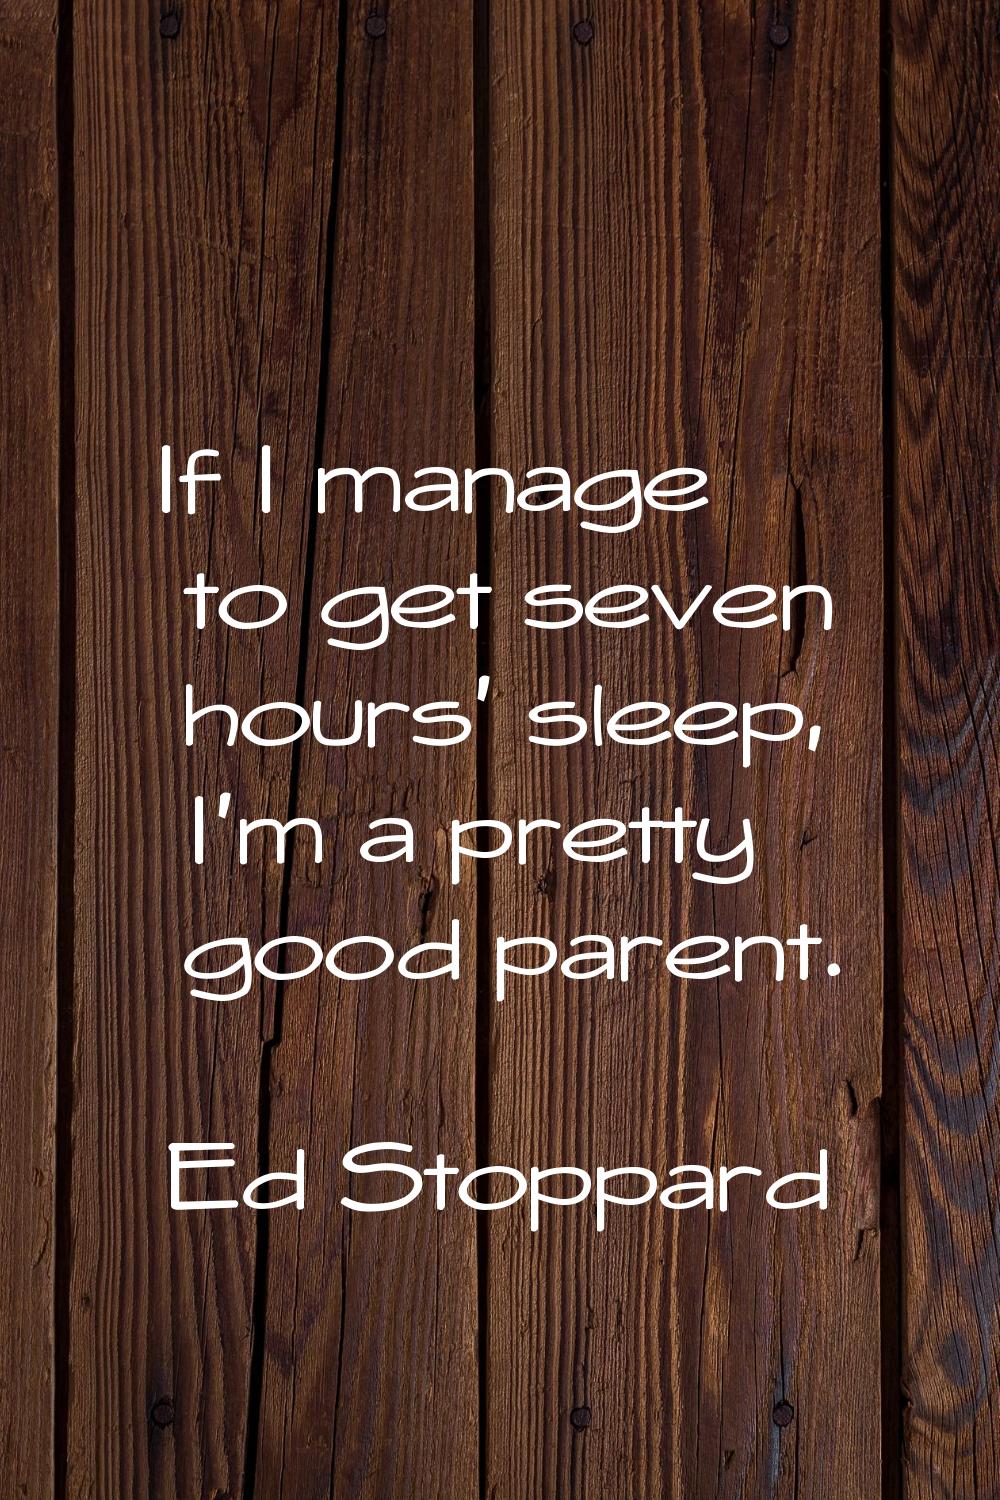 If I manage to get seven hours' sleep, I'm a pretty good parent.